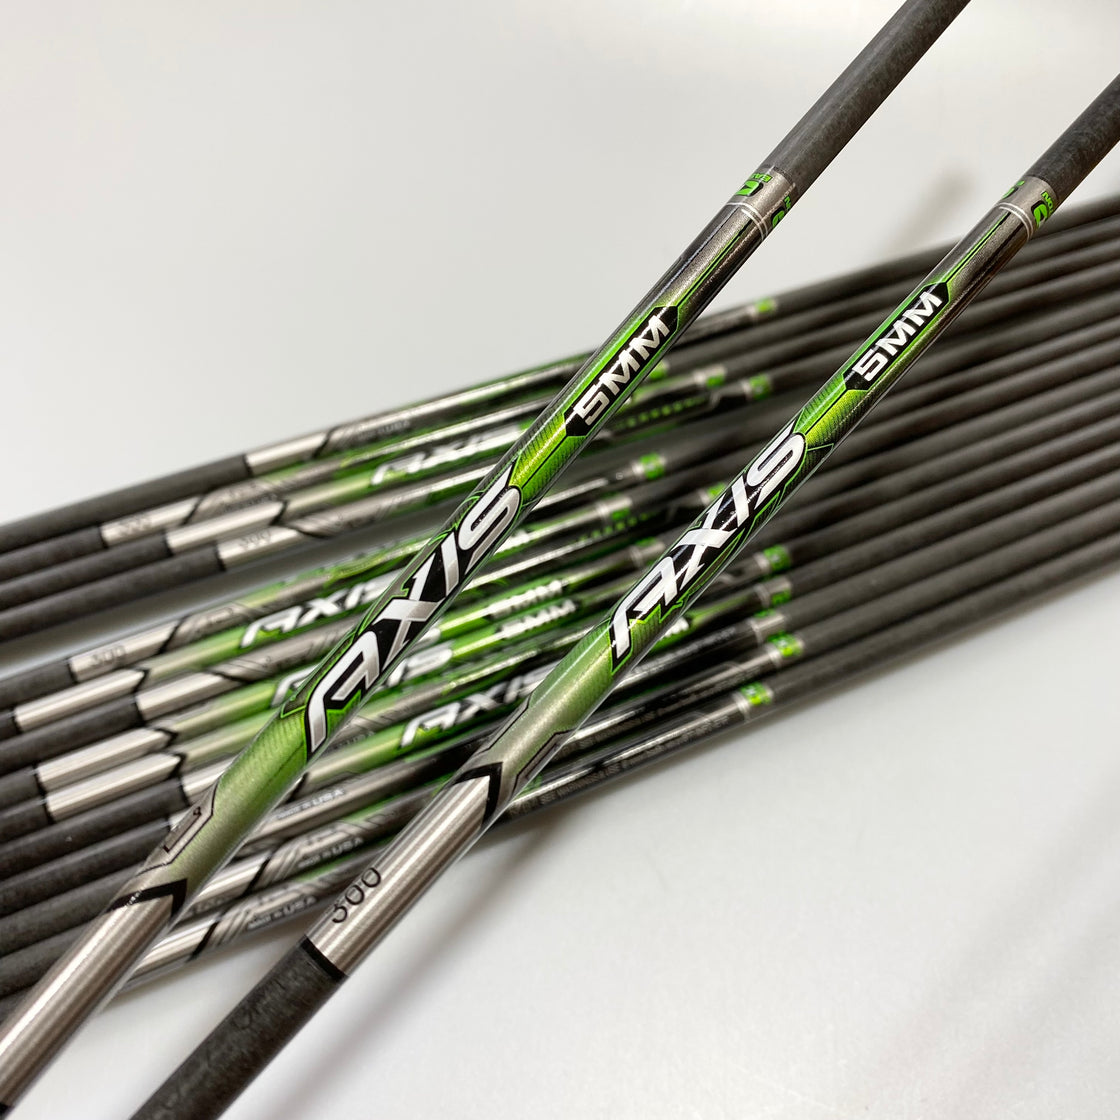 Easton 5mm Axis Carbon Arrow - Shaft only